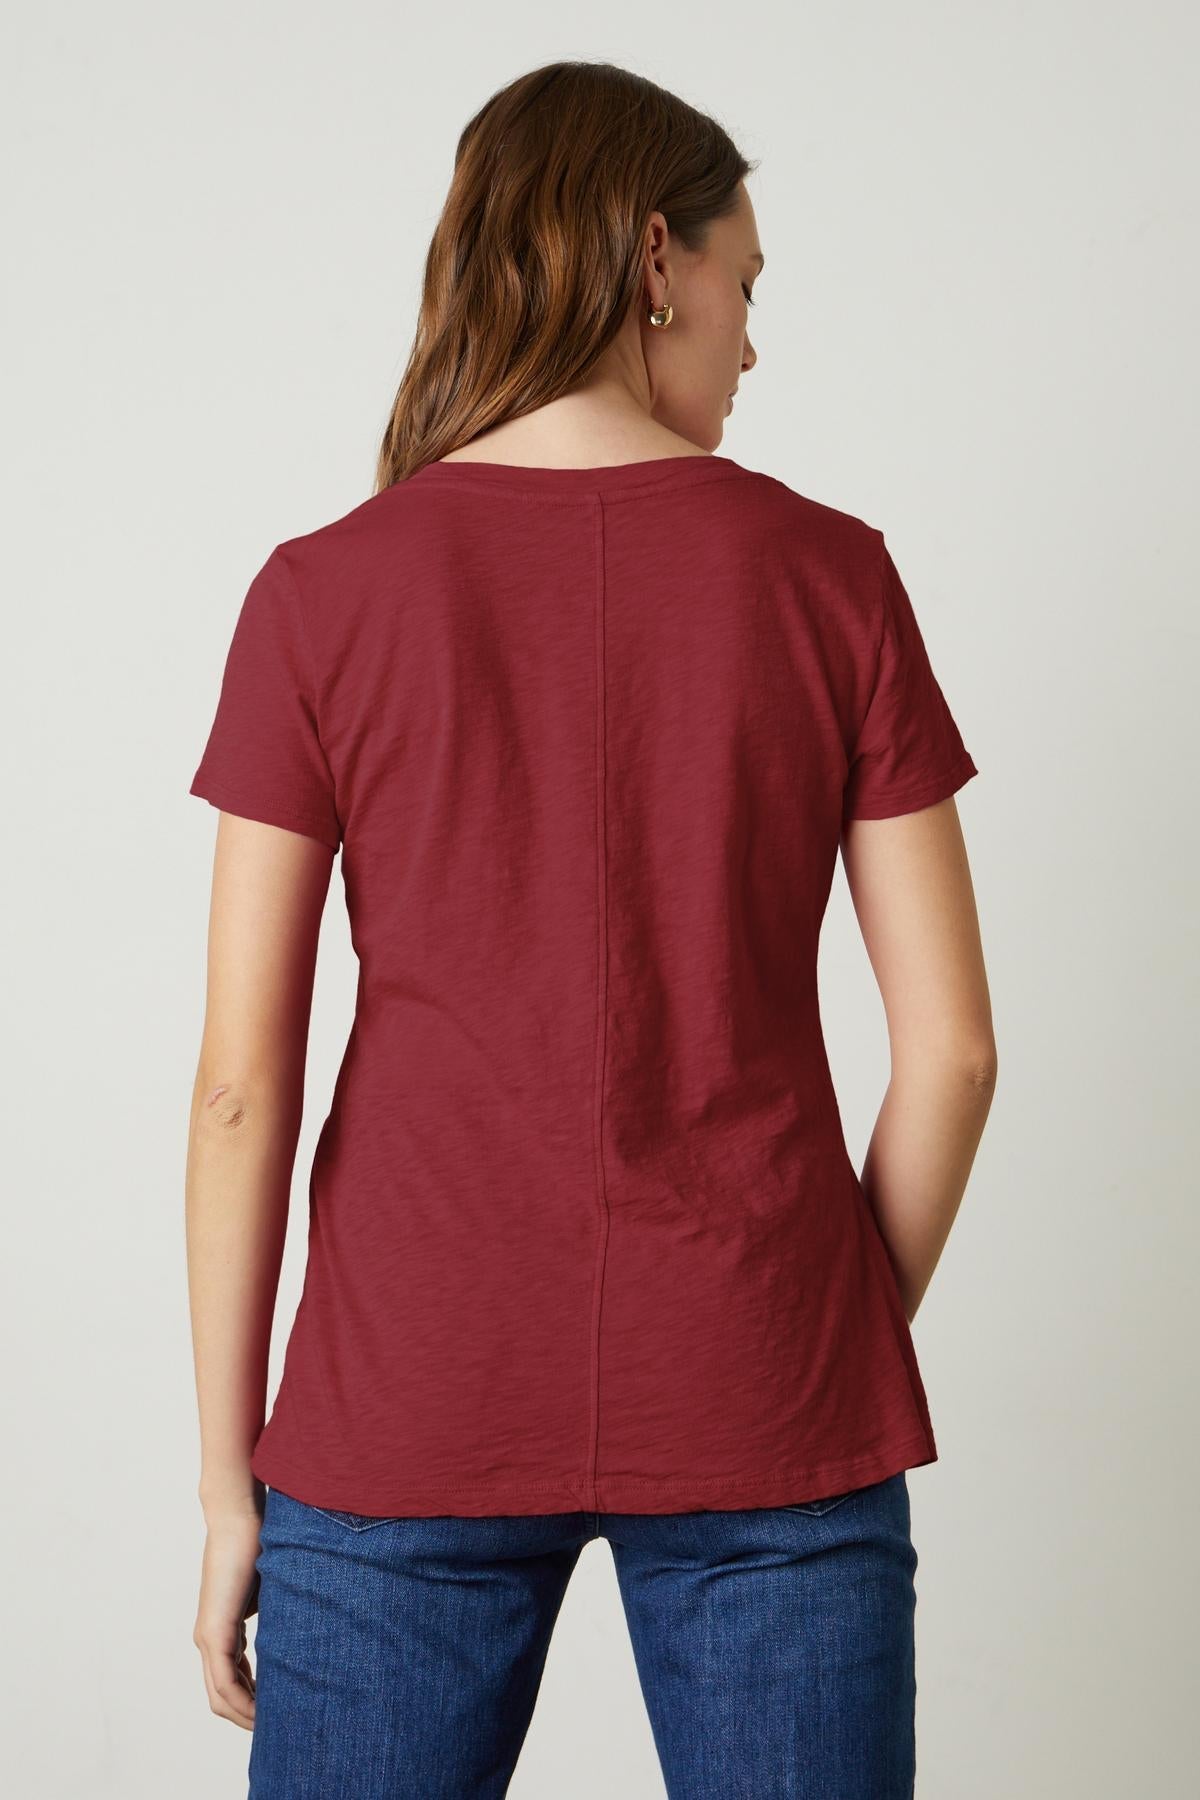 The back view of a woman wearing a Velvet by Graham & Spencer LILITH COTTON SLUB V-NECK TEE.-35782982271169